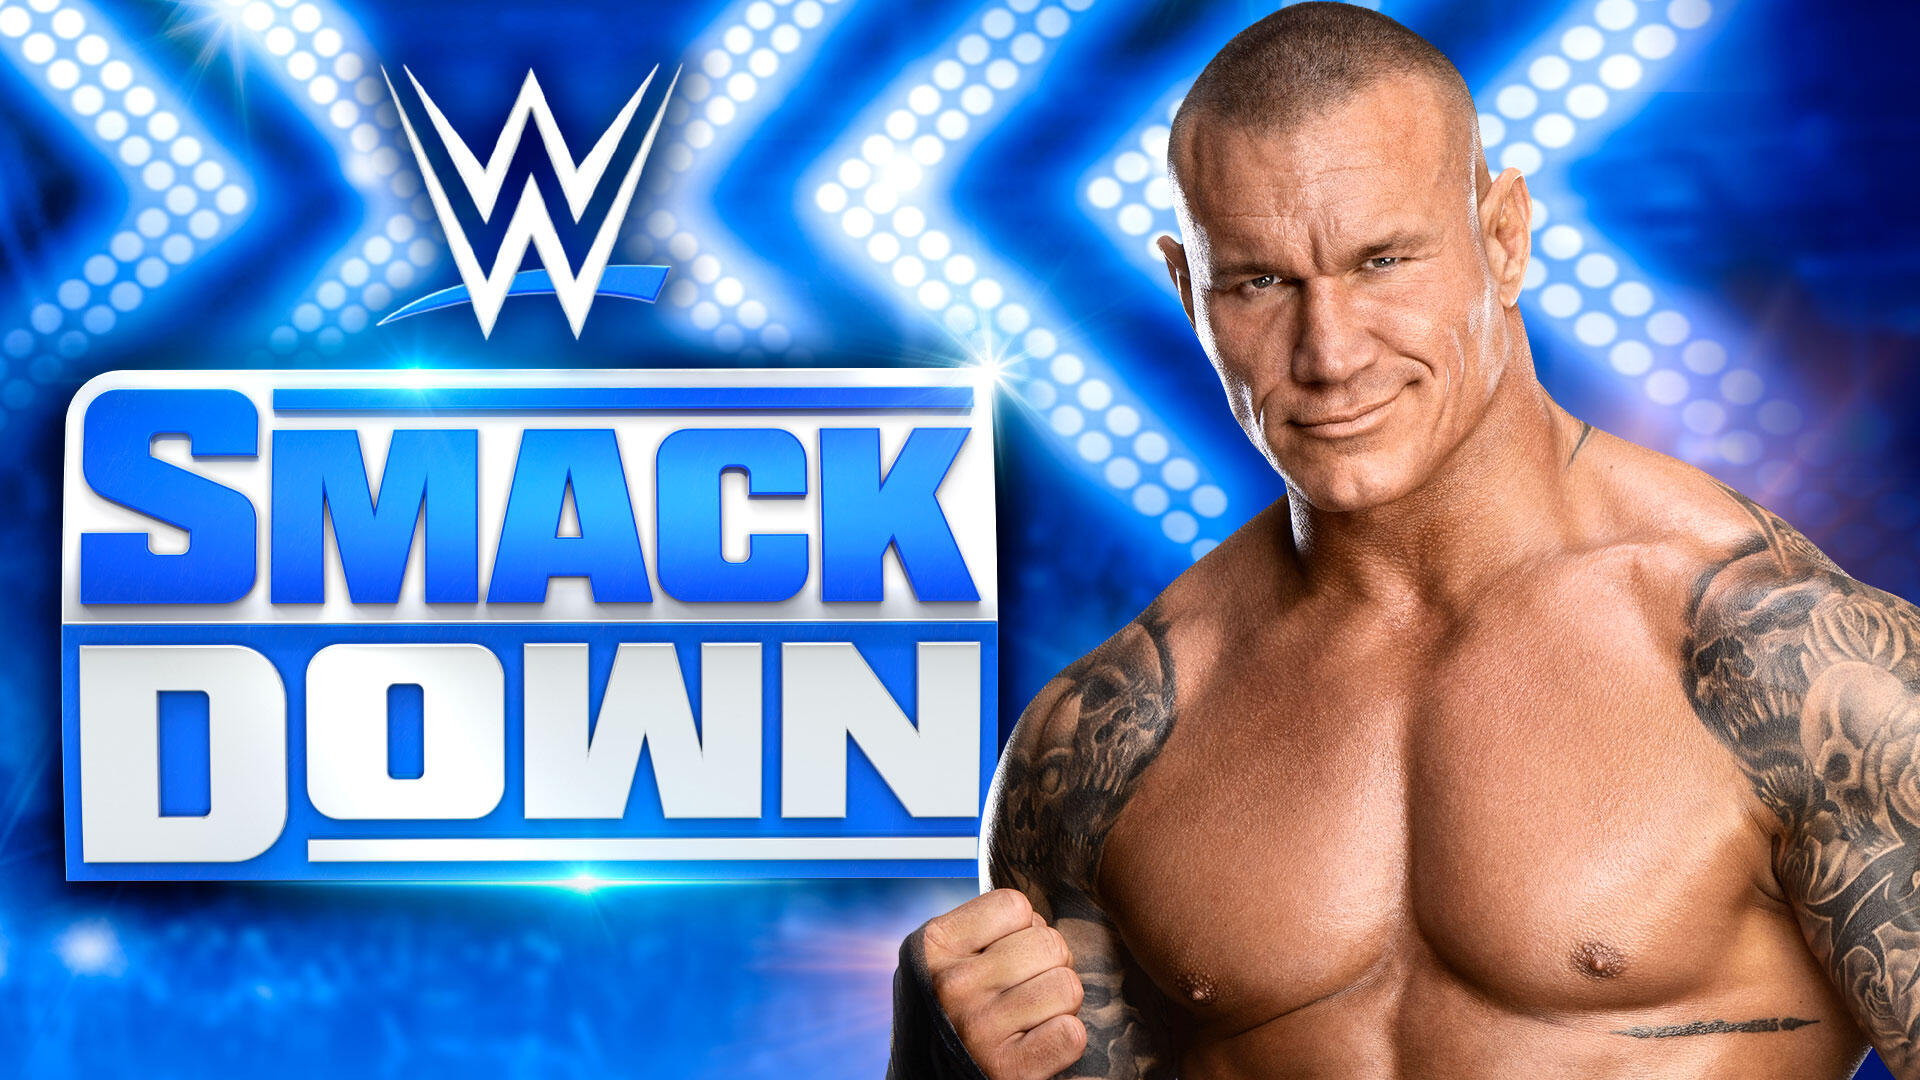 Reports indicate WWE is extremely delighted with the response to SmackDown, additional backstage guests, among other things.